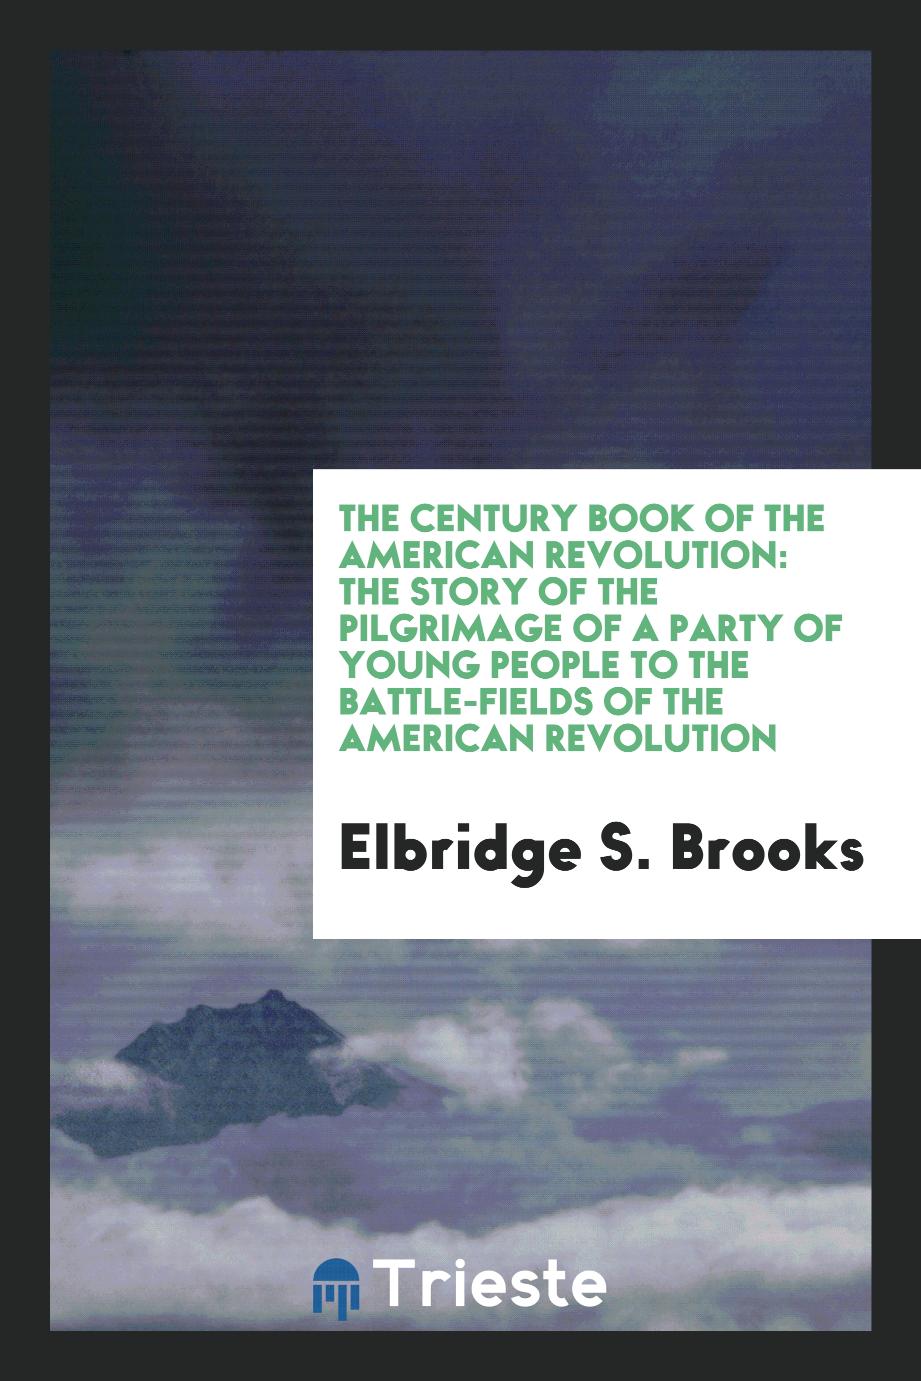 The century book of the American revolution: the story of the Pilgrimage of a party of young people to the battle-fields of the American revolution